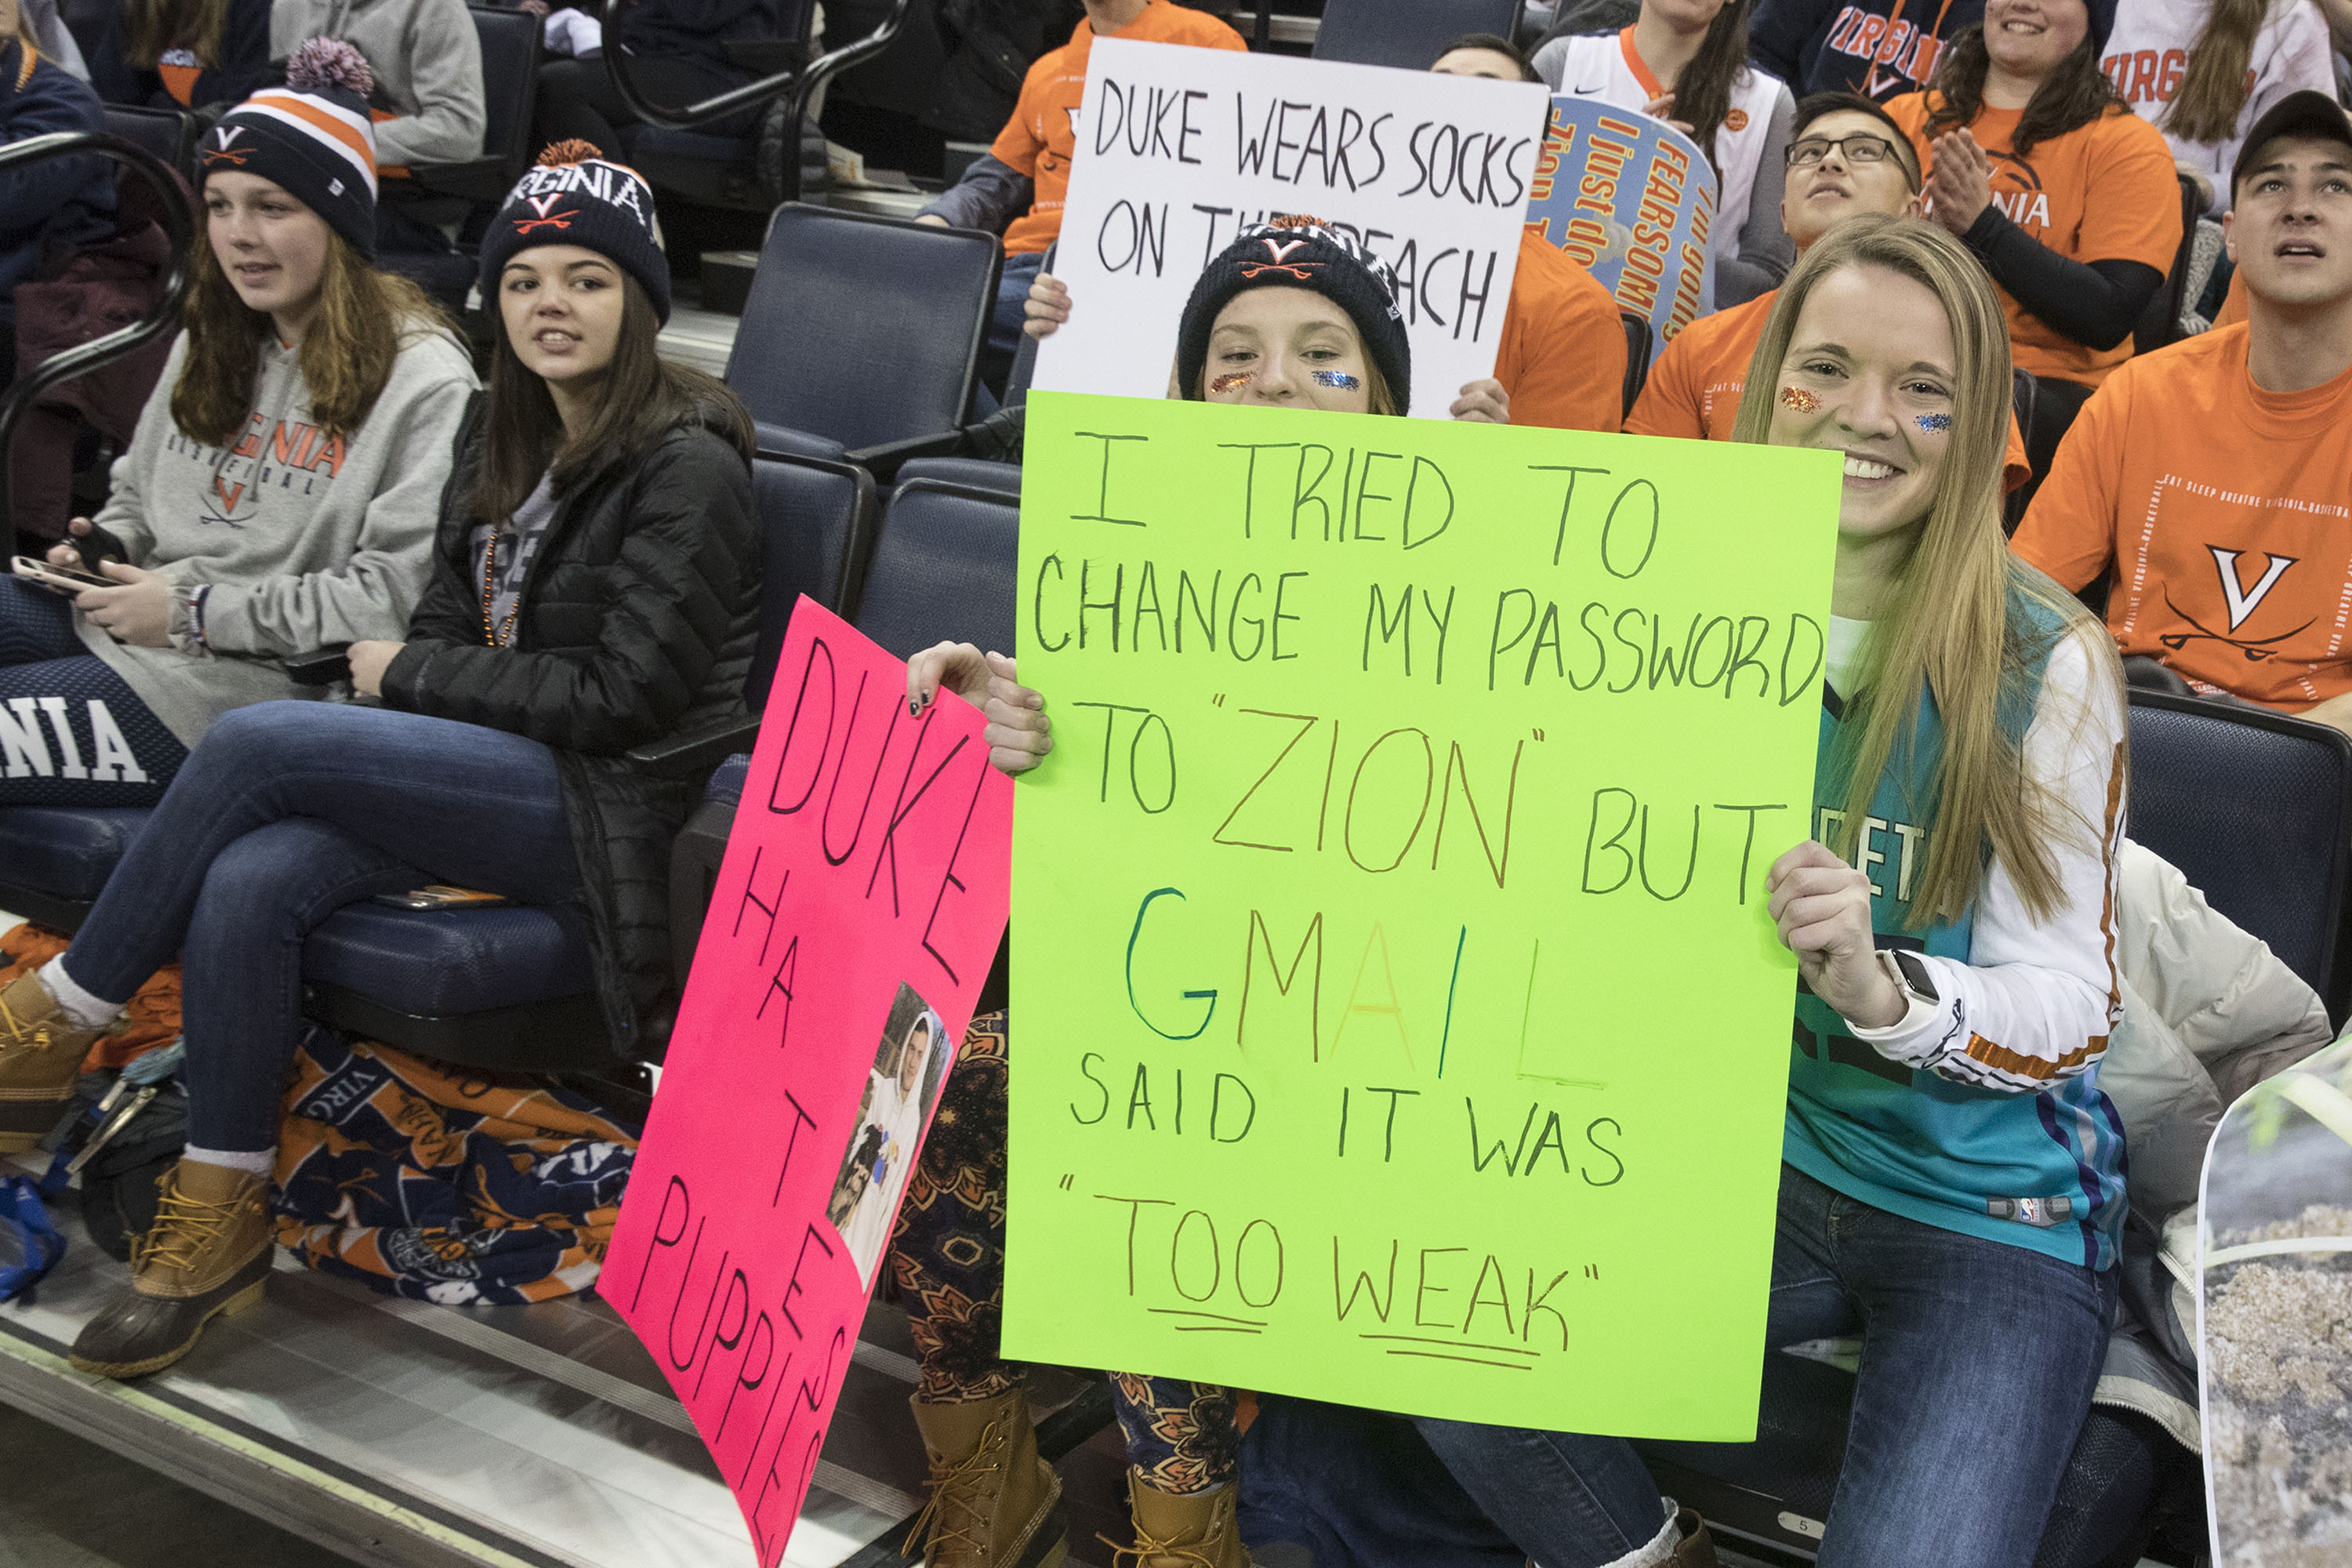 Fans holding a sign that reads: I tried to change my password to "Zion" but GMAIL said it was "Too Weak"